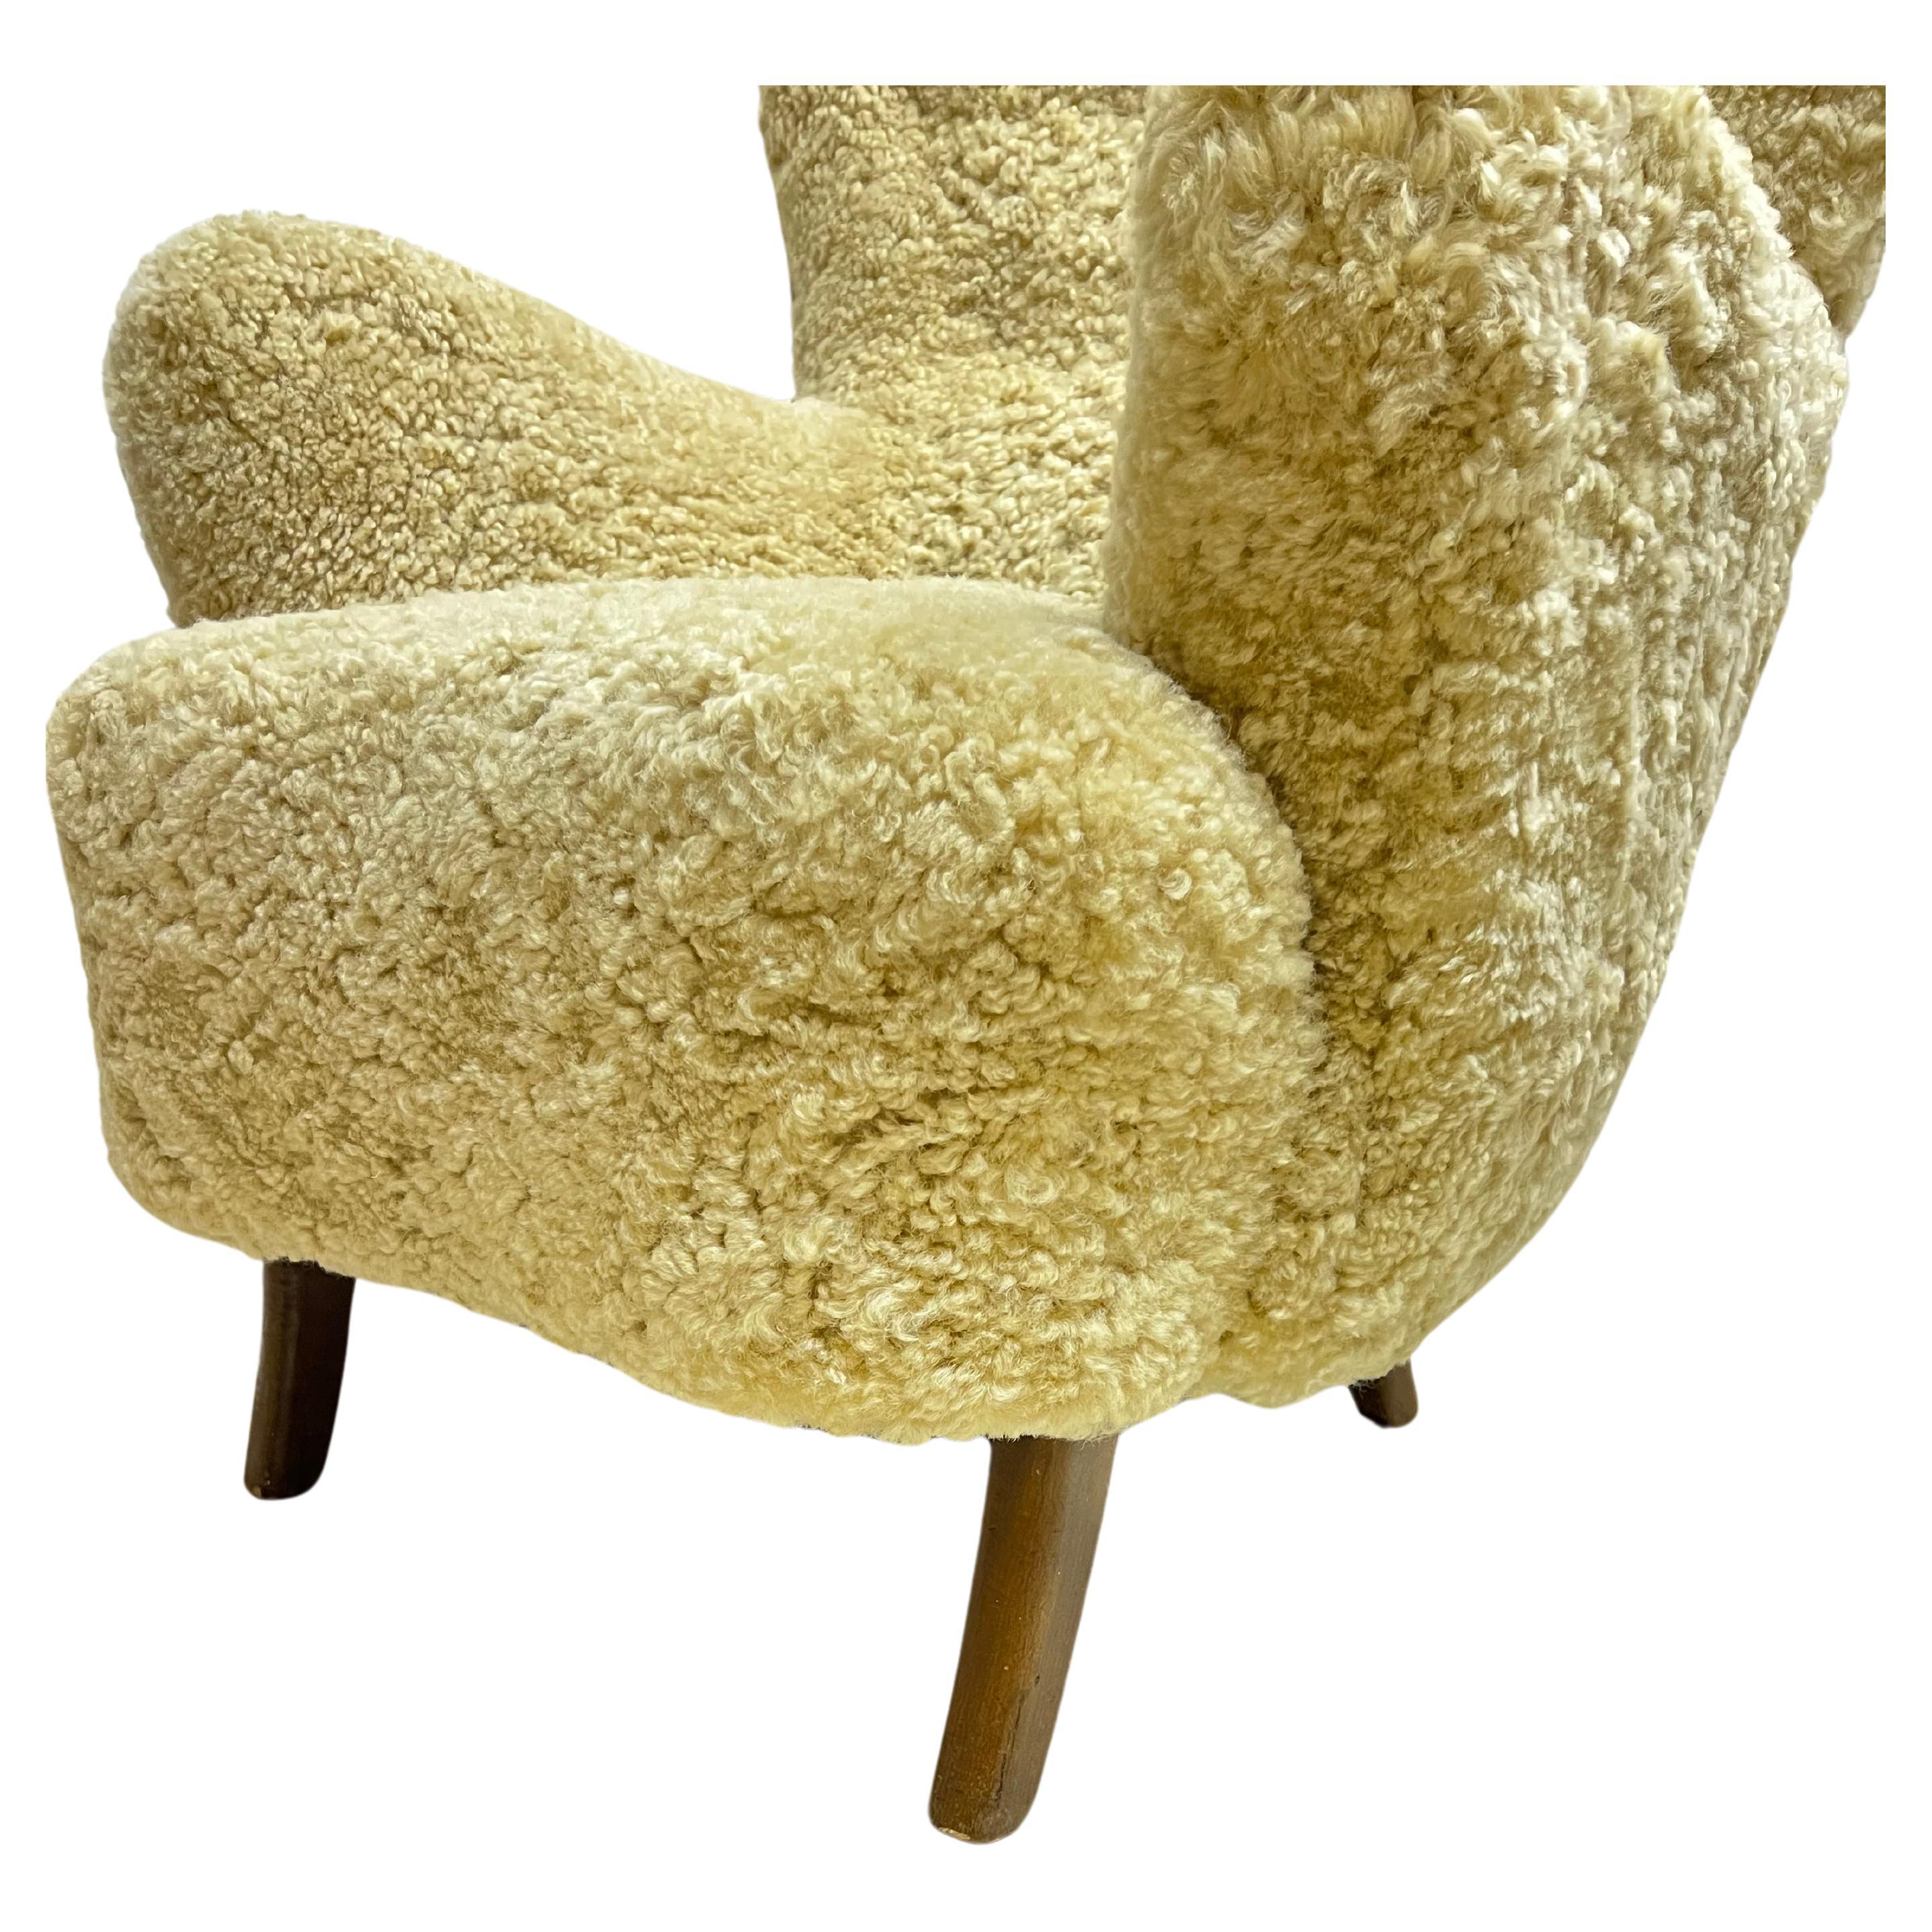 A pair of Danish Modern high-backed lounge chairs by Danish designer, Alfred Christensen, newly recovered in natural honey colored sheepskin, with curved arms. Circa 1950s.

About the Designer: In 1936, Christensen joined Knoll as a designer and